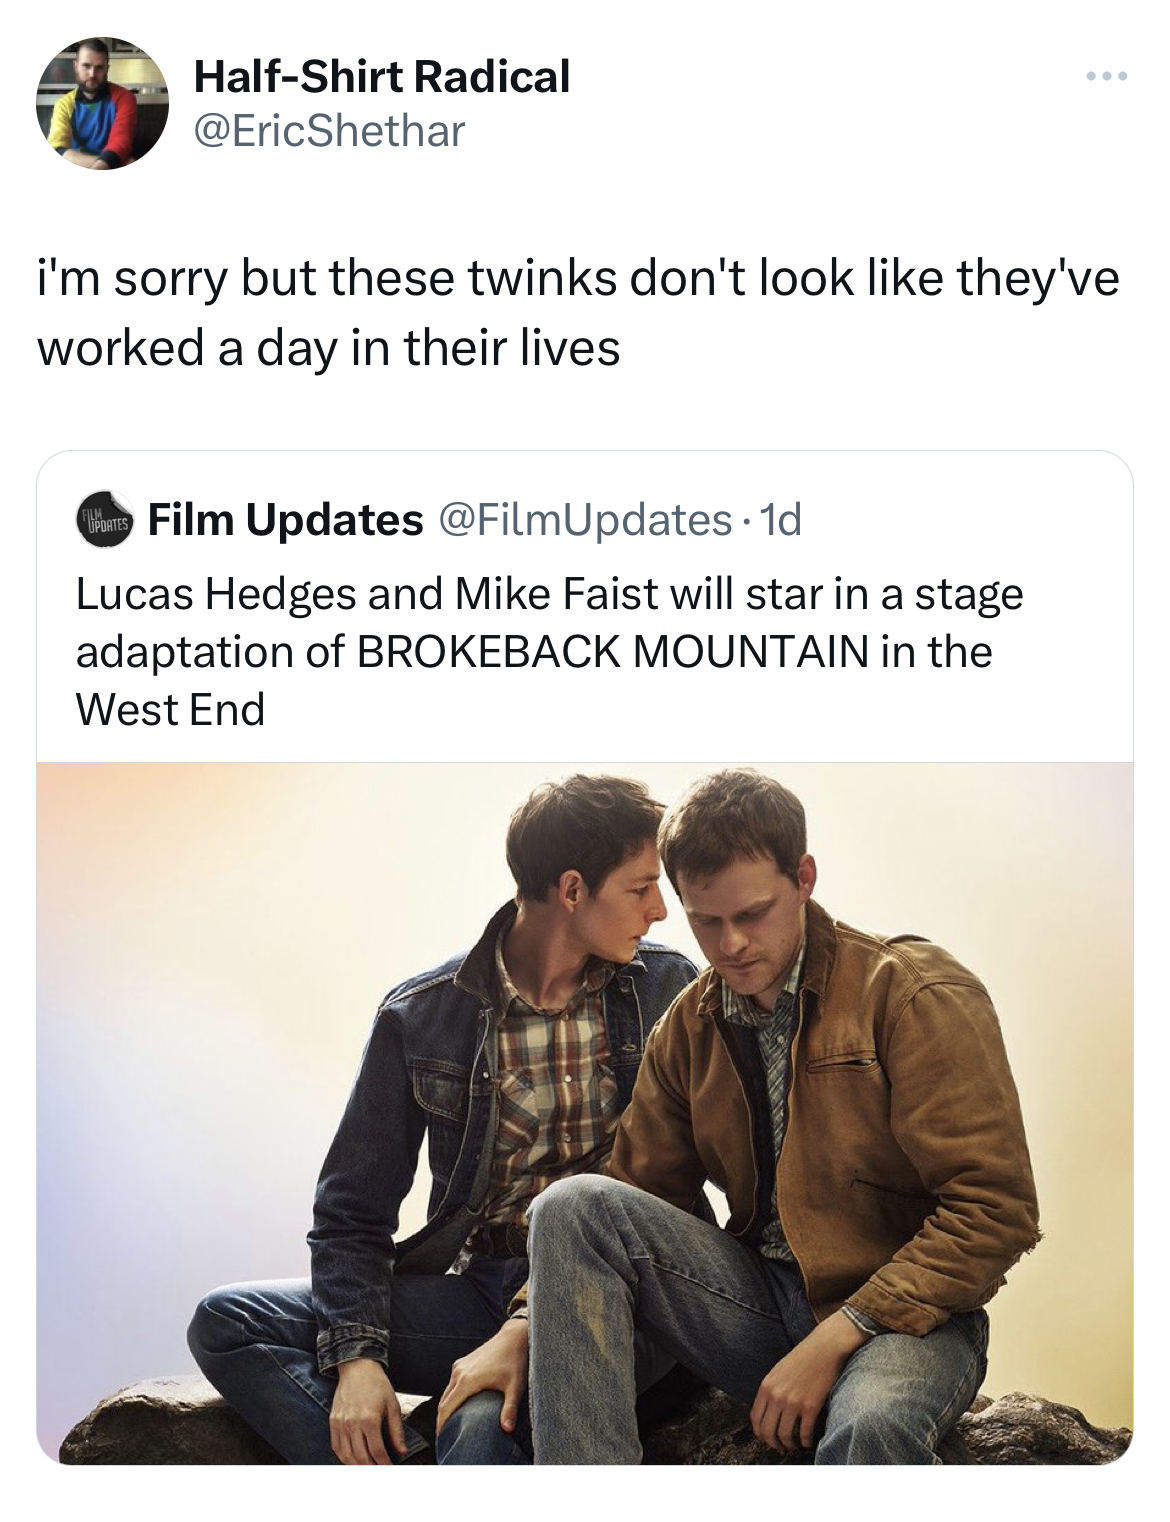 savage tweets - Brokeback Mountain - HalfShirt Radical i'm sorry but these twinks don't look they've worked a day in their lives Film Updates 1d Lucas Hedges and Mike Faist will star in a stage adaptation of Brokeback Mountain in the West End